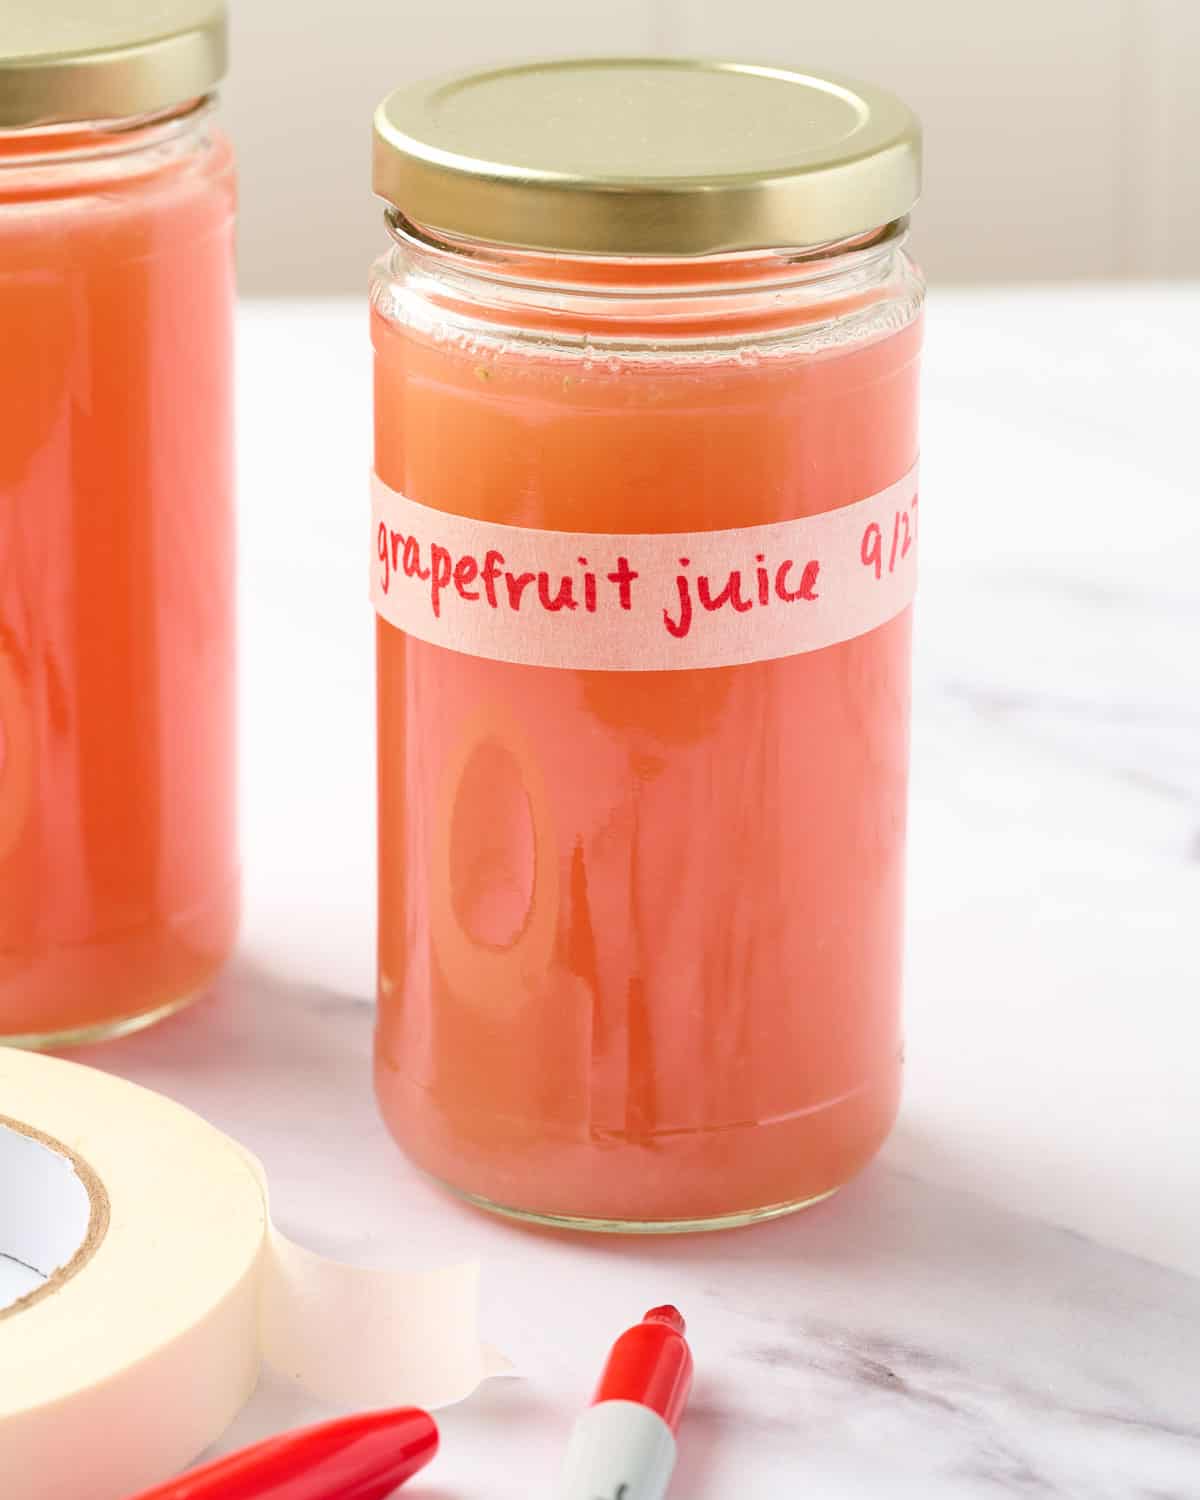 Grapefruit juice in a container with a label.